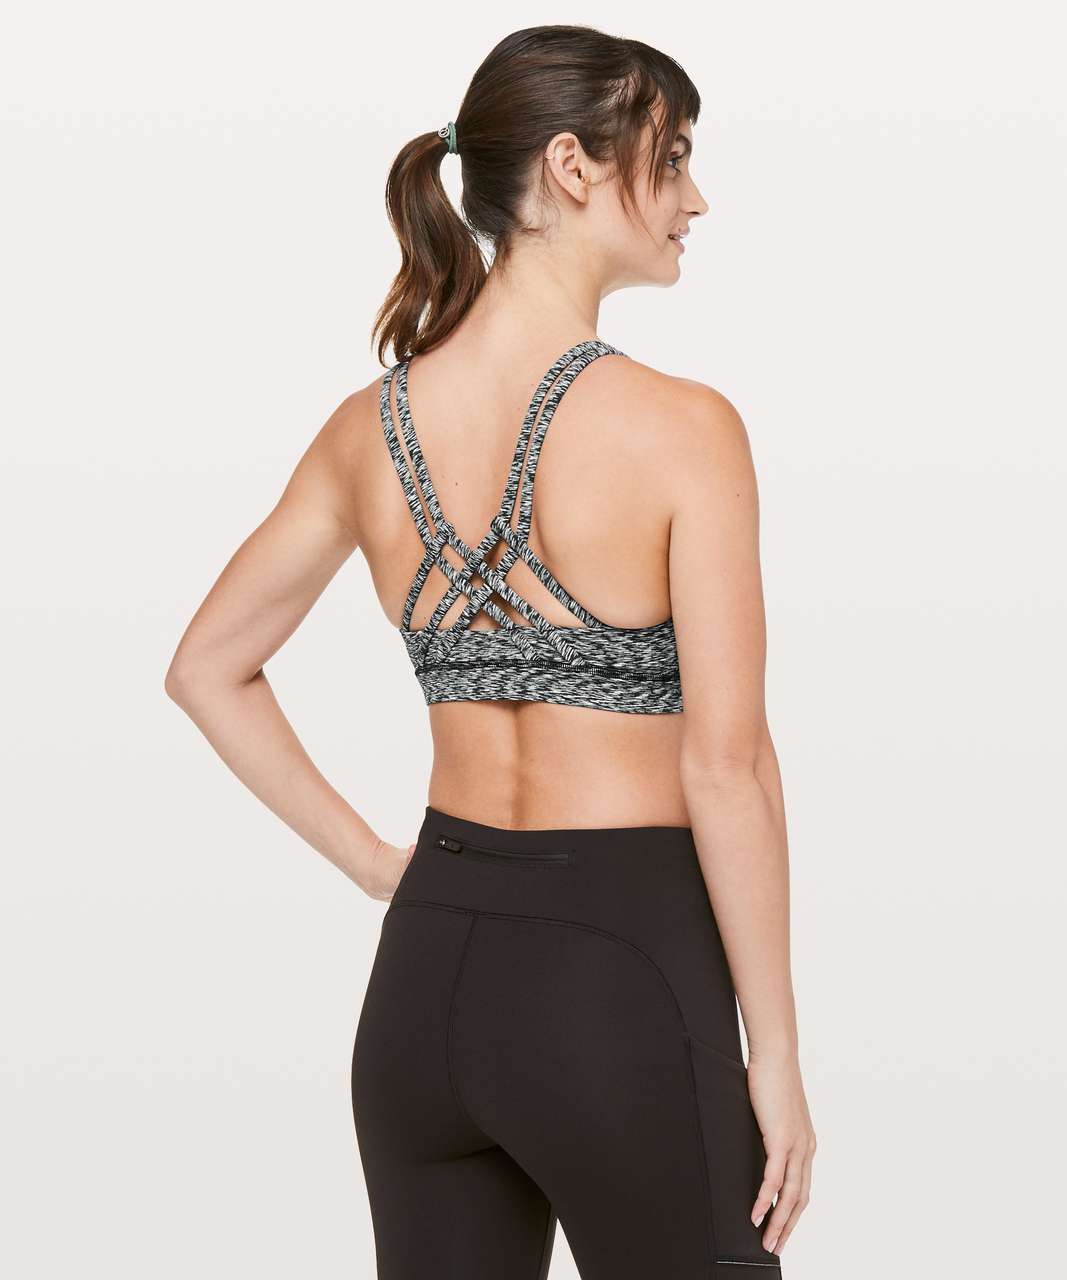 Lululemon Energy Bra *Strapped - Spaced Out Space Dye Black White